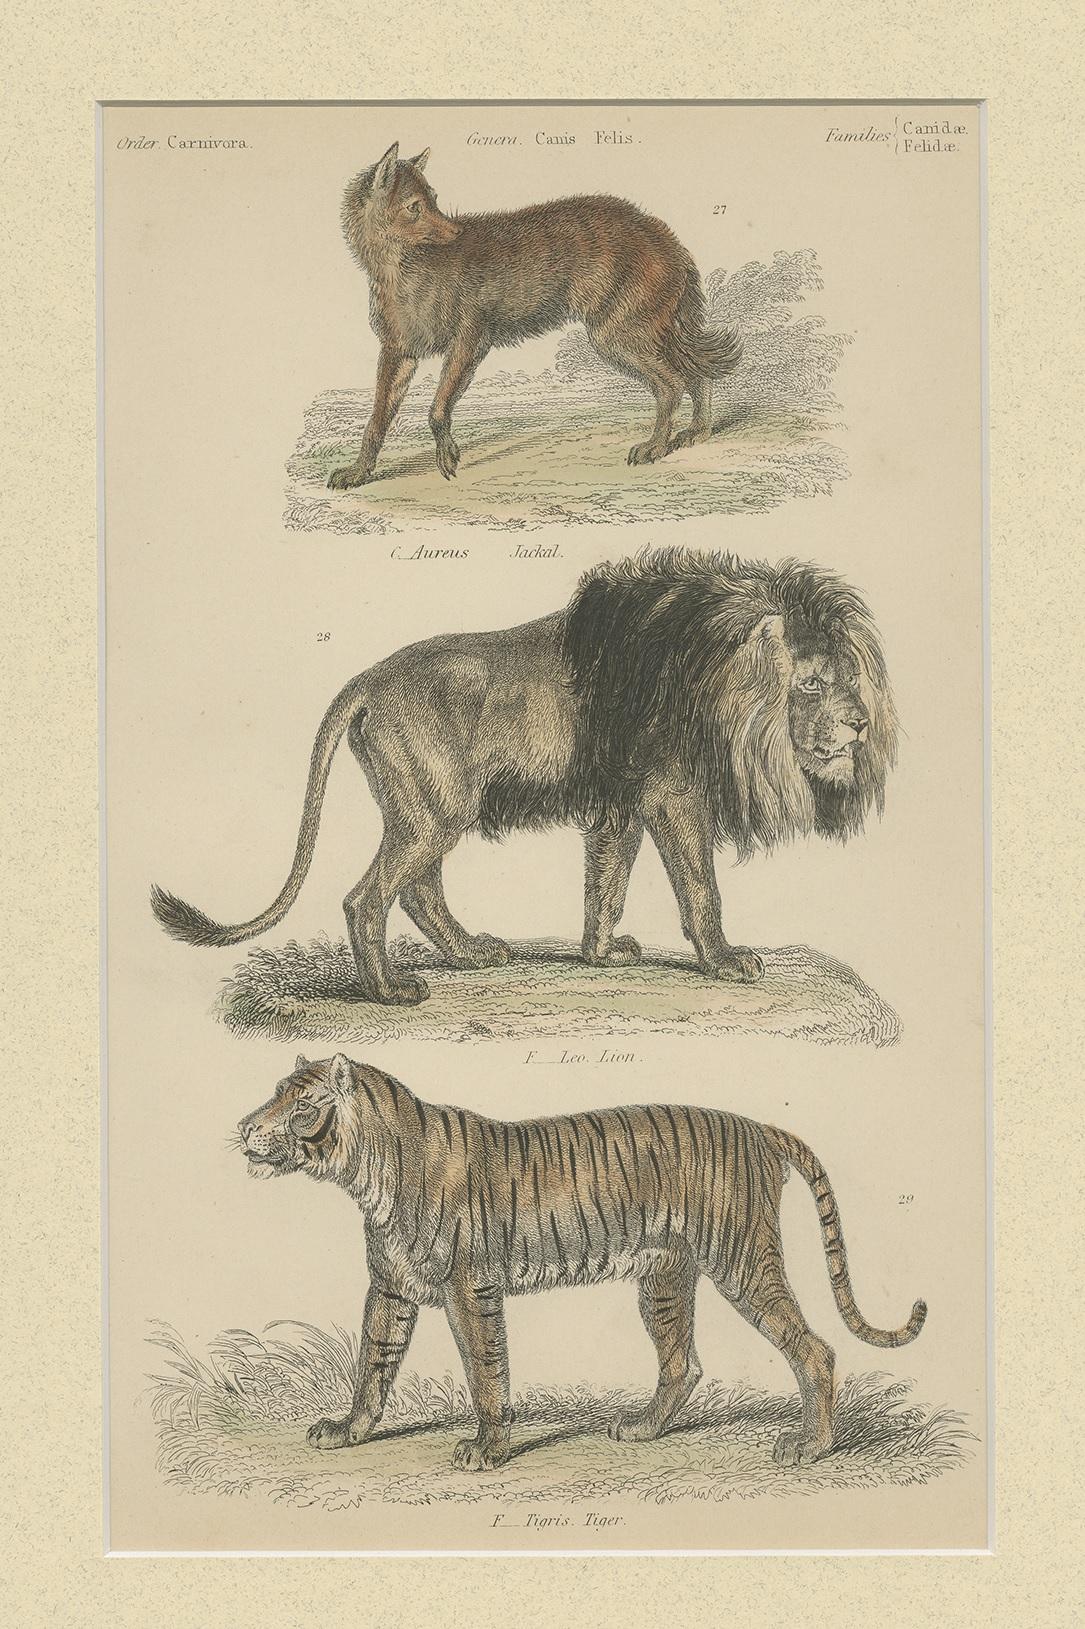 Antique print titled 'Mammalia'. Print of a jackal, lion and tiger. This print originates from 'The Museum of Natural History' by John Richardson. Published by William Mackenzie.

Passepartout included.